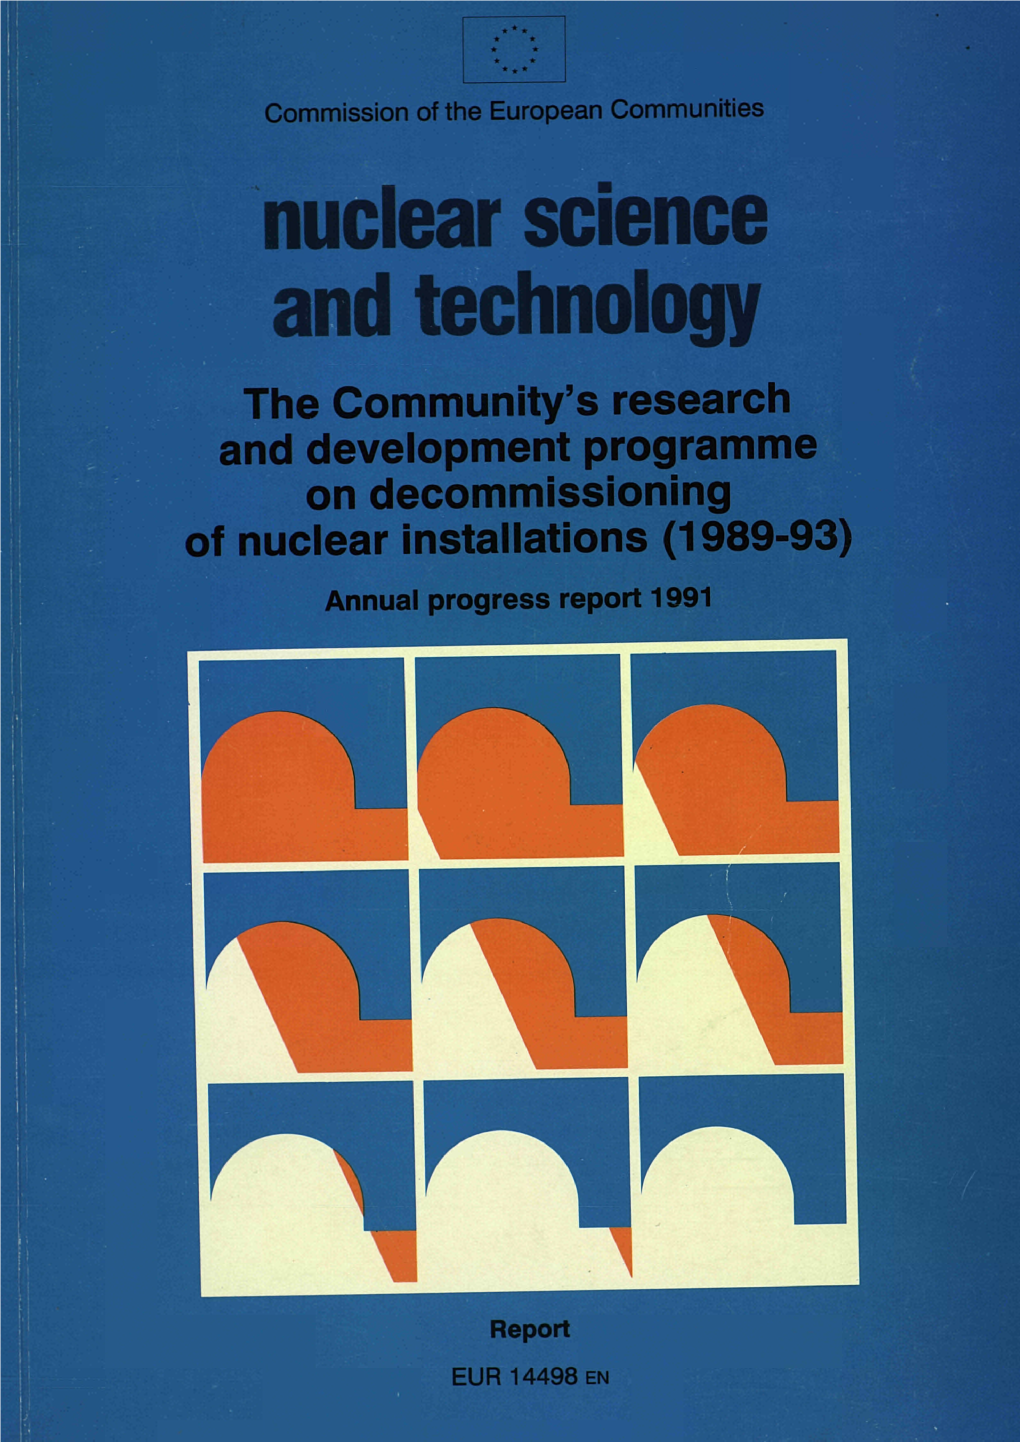 The Community's Research and Development Programme on Decommissioning of Nuclear Installations (1989-93) Annual Progress Report 1991